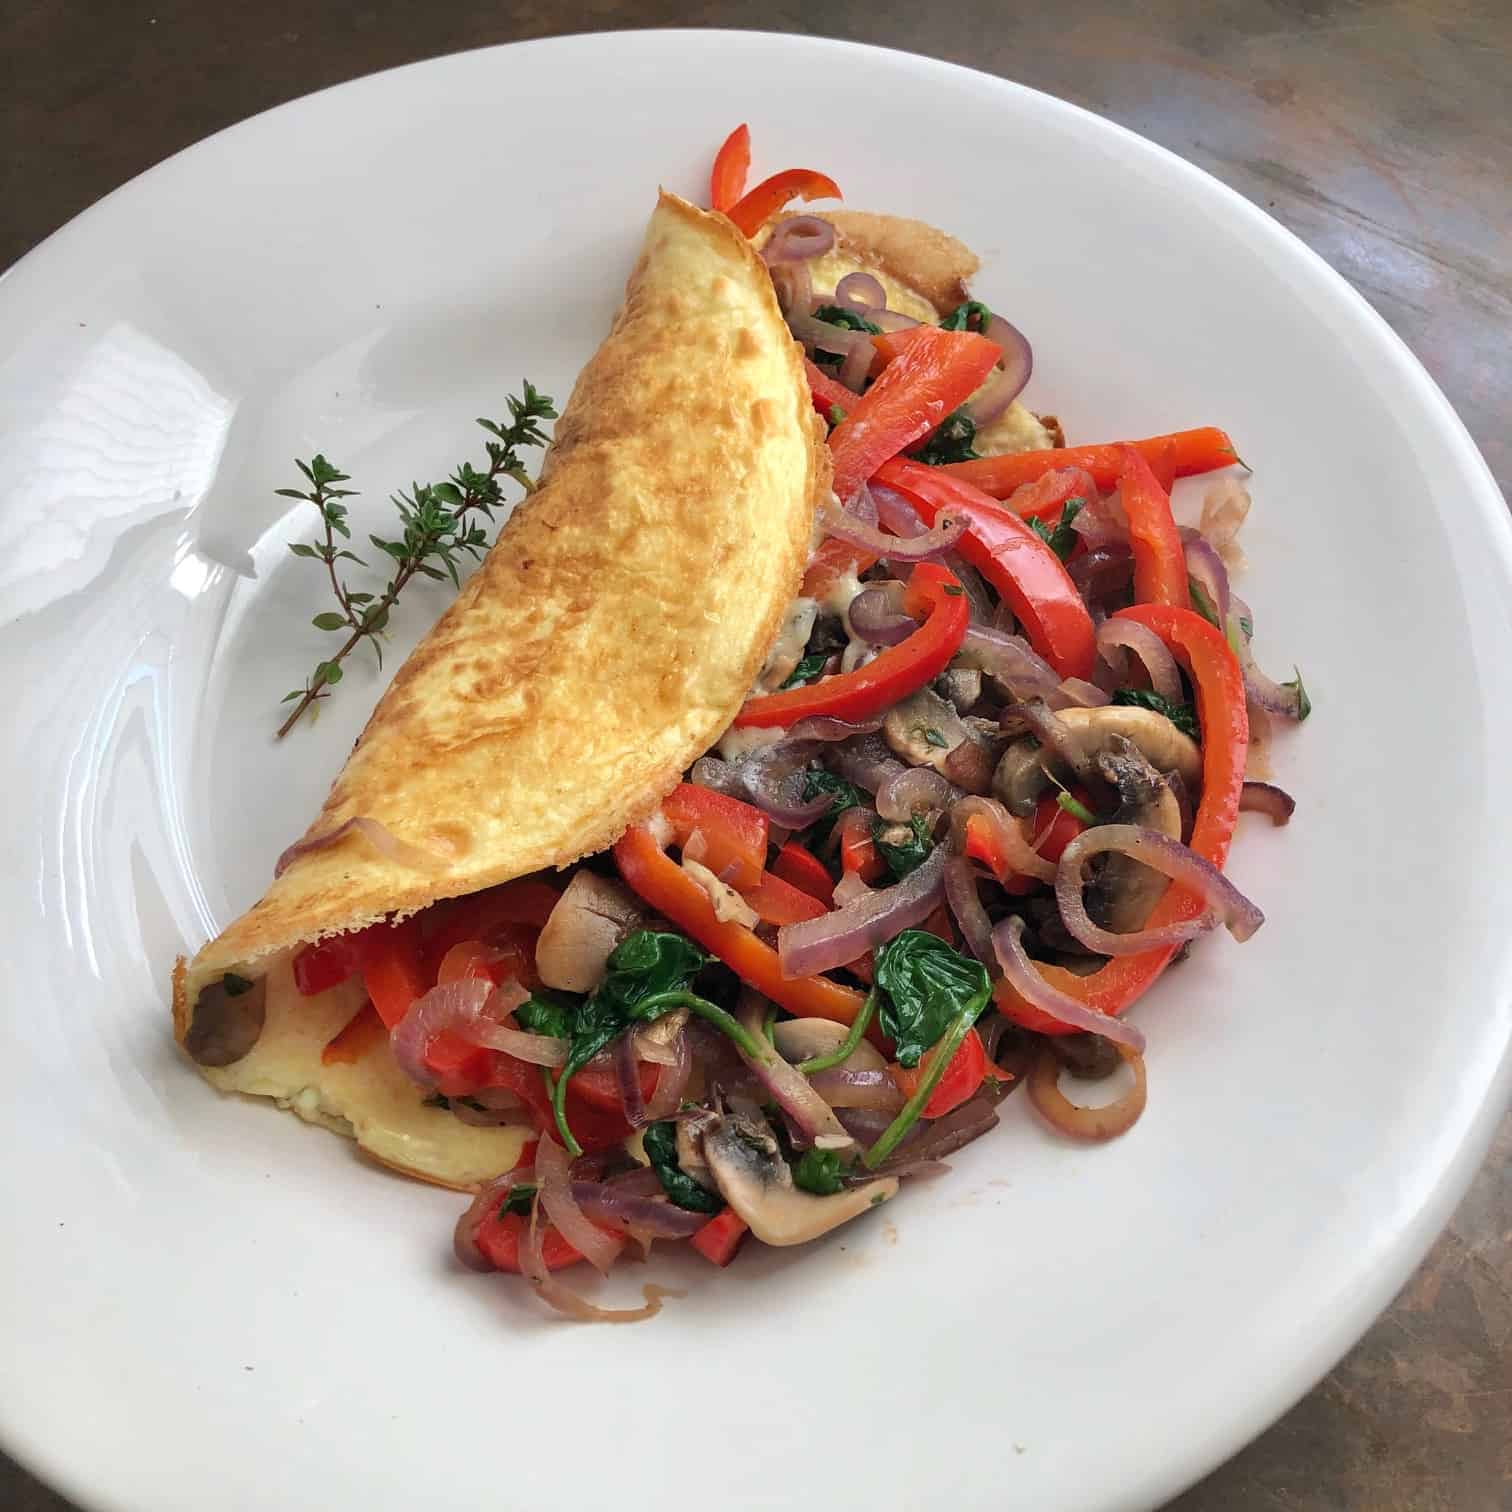 overstuffed omelet for two